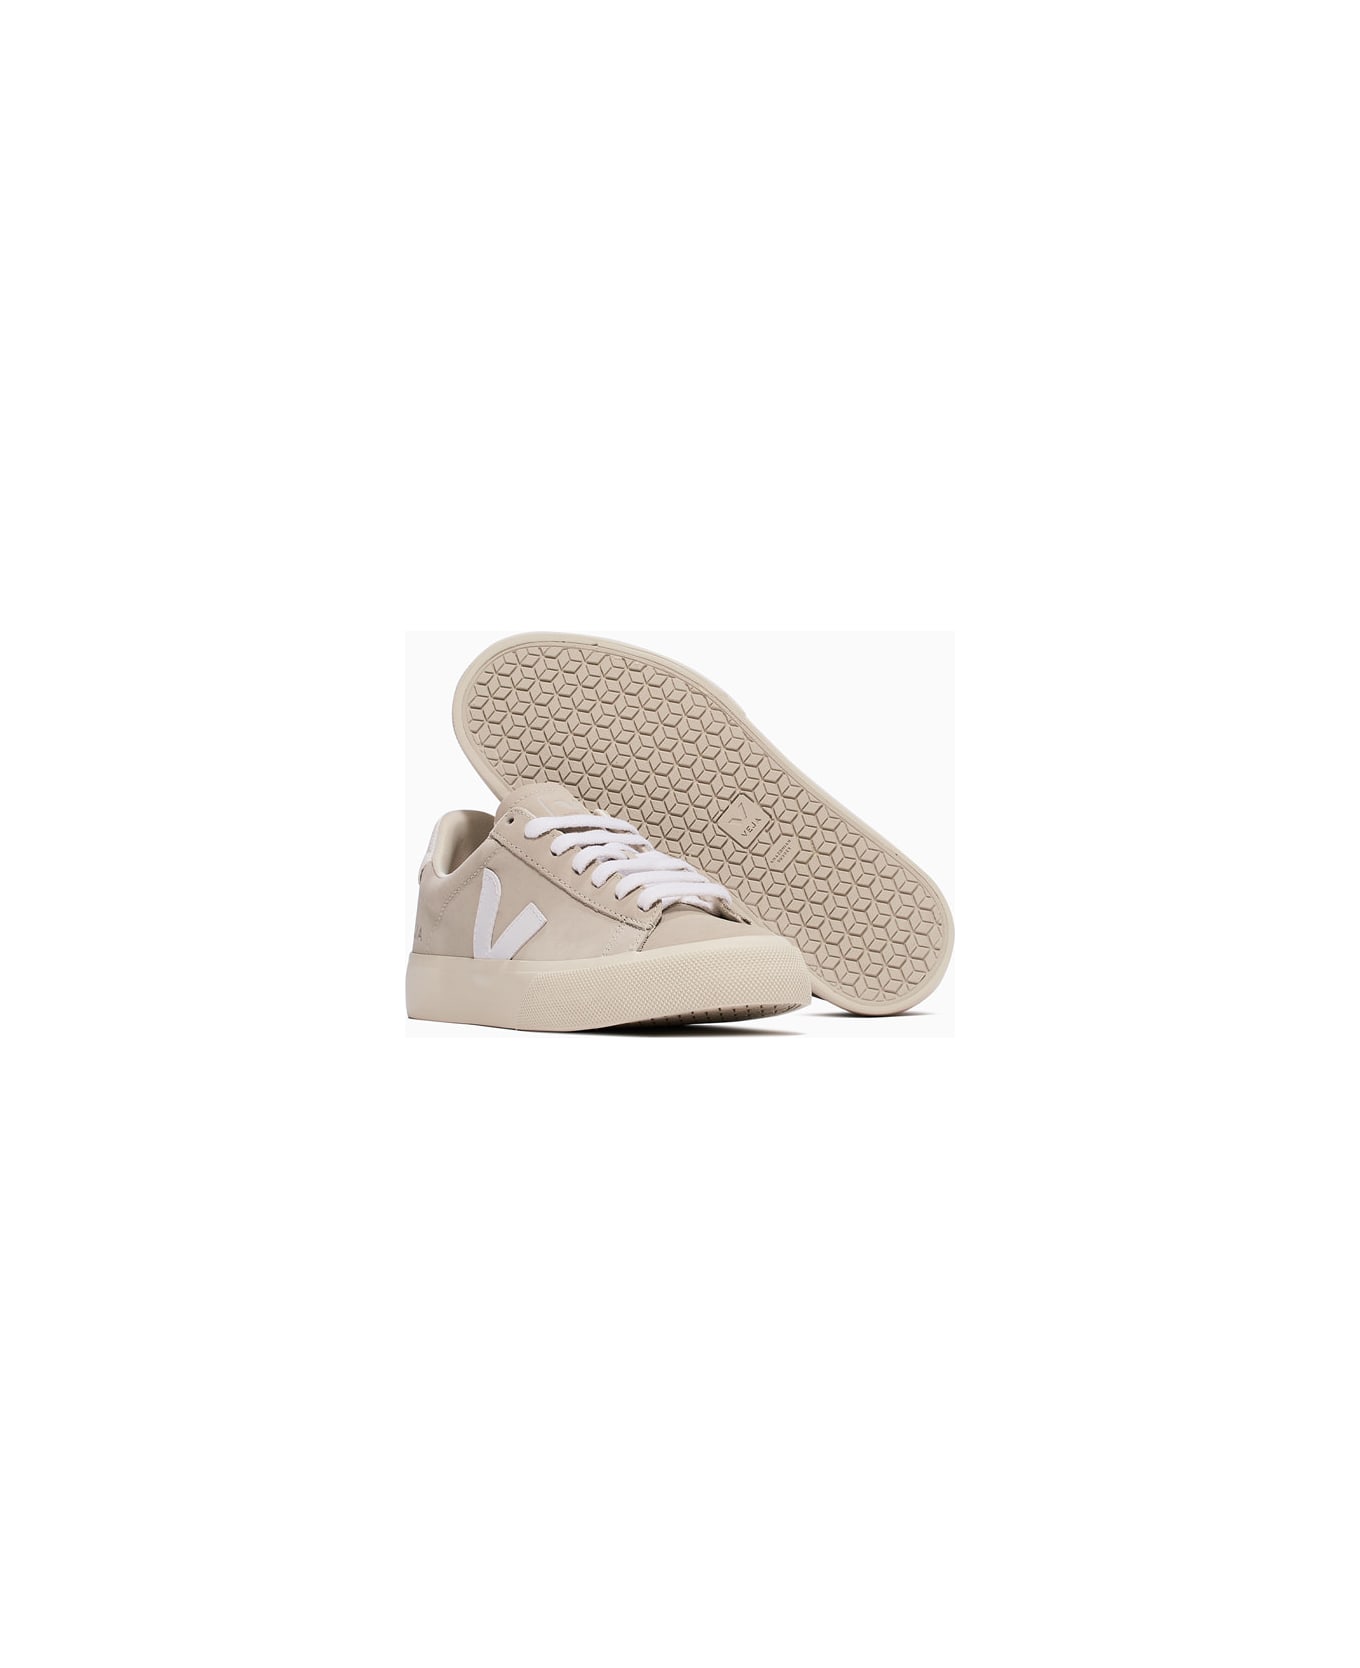 Veja Campo Sneakers Cp0502485 - White Matcha